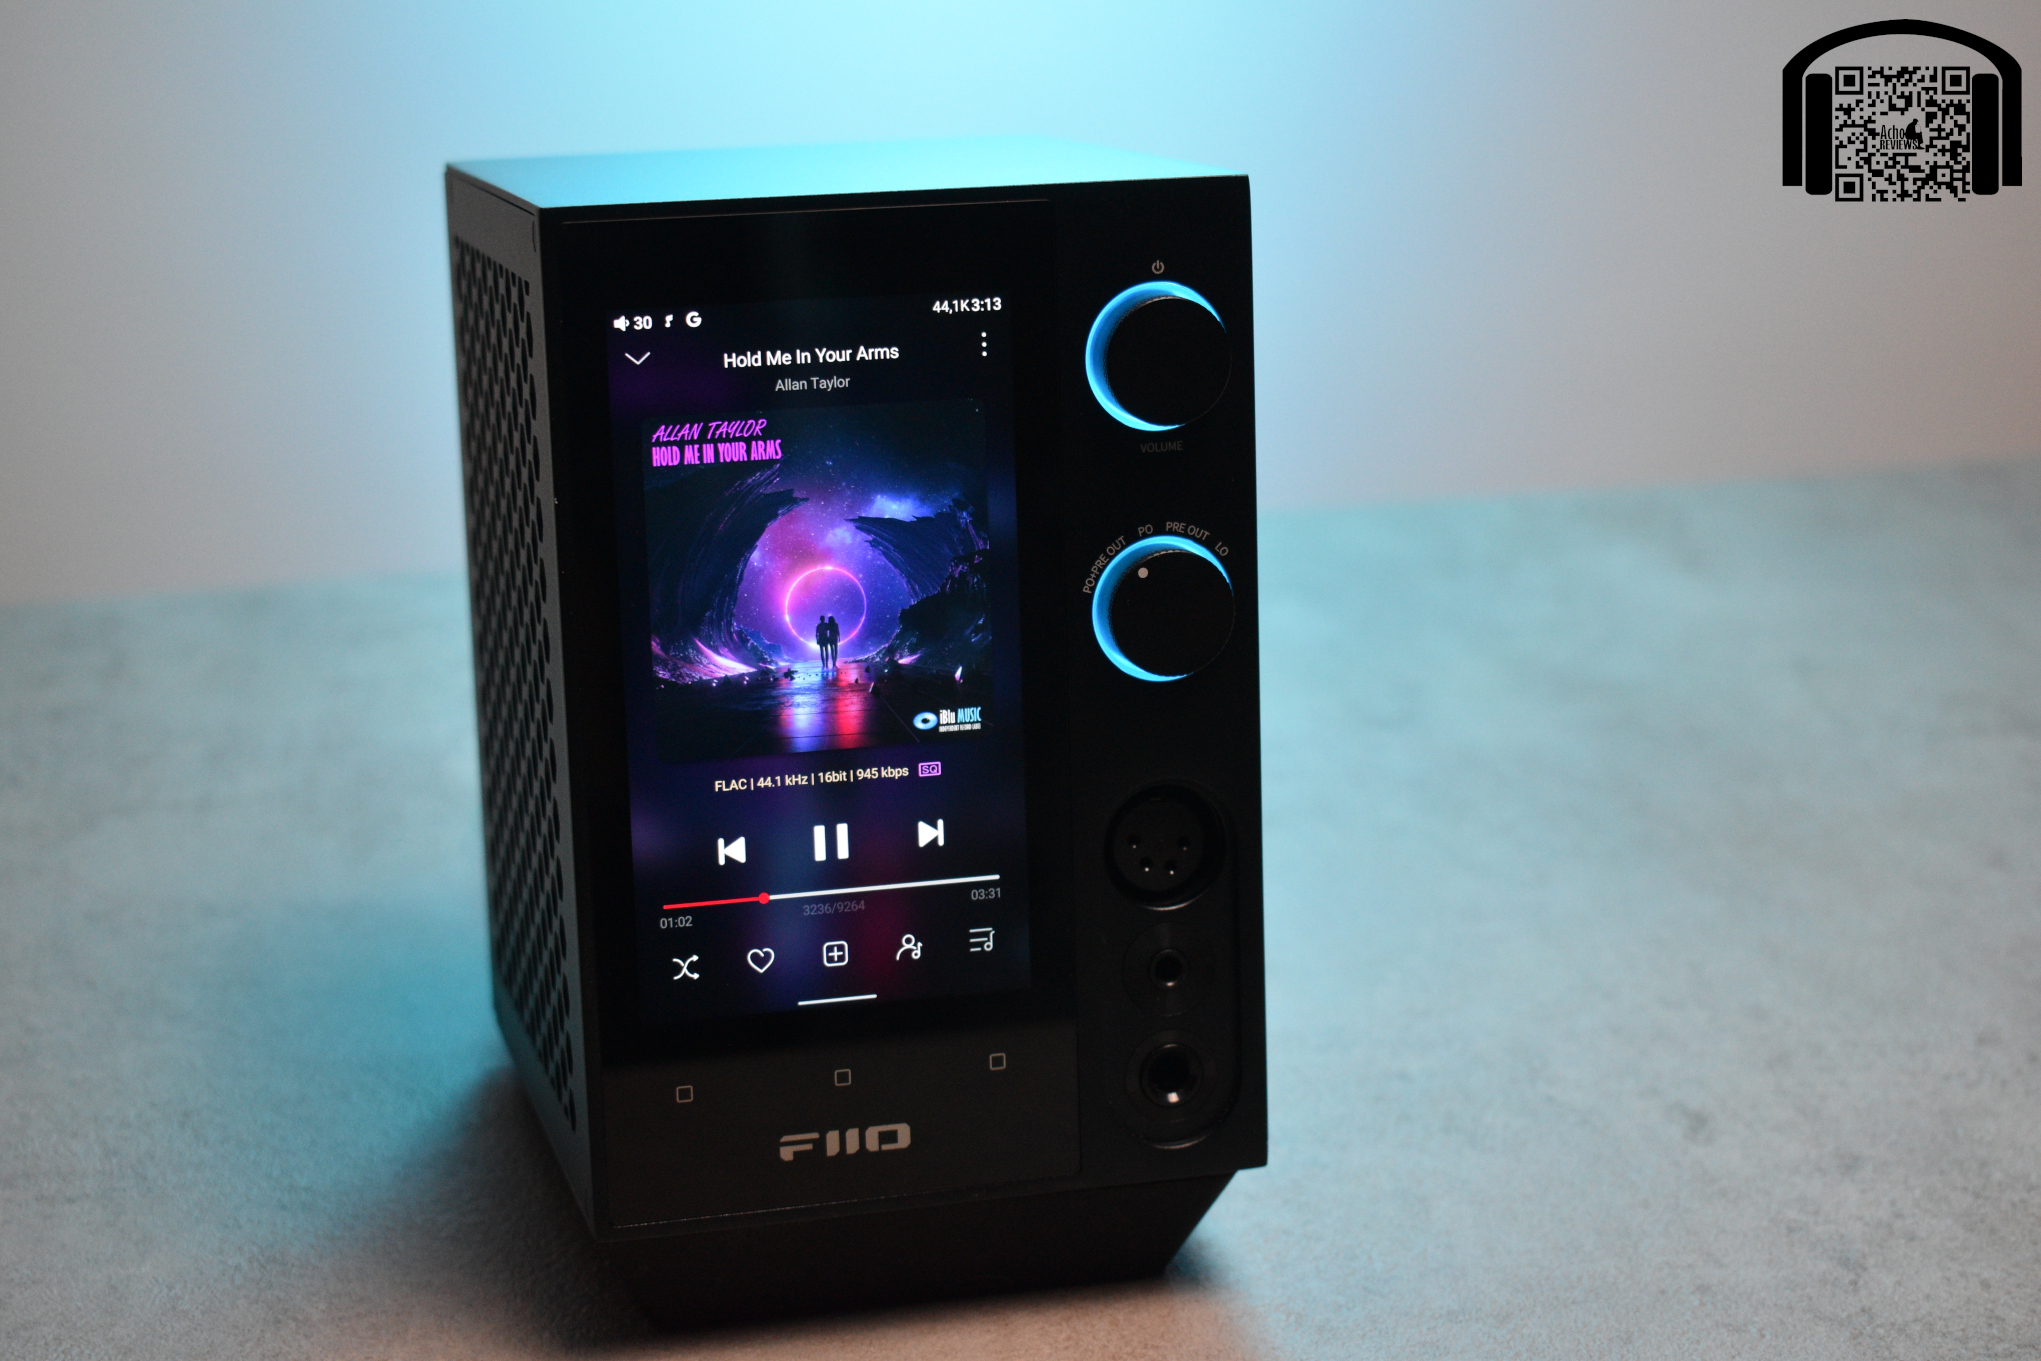 This Device Is All You Need - FiiO R7